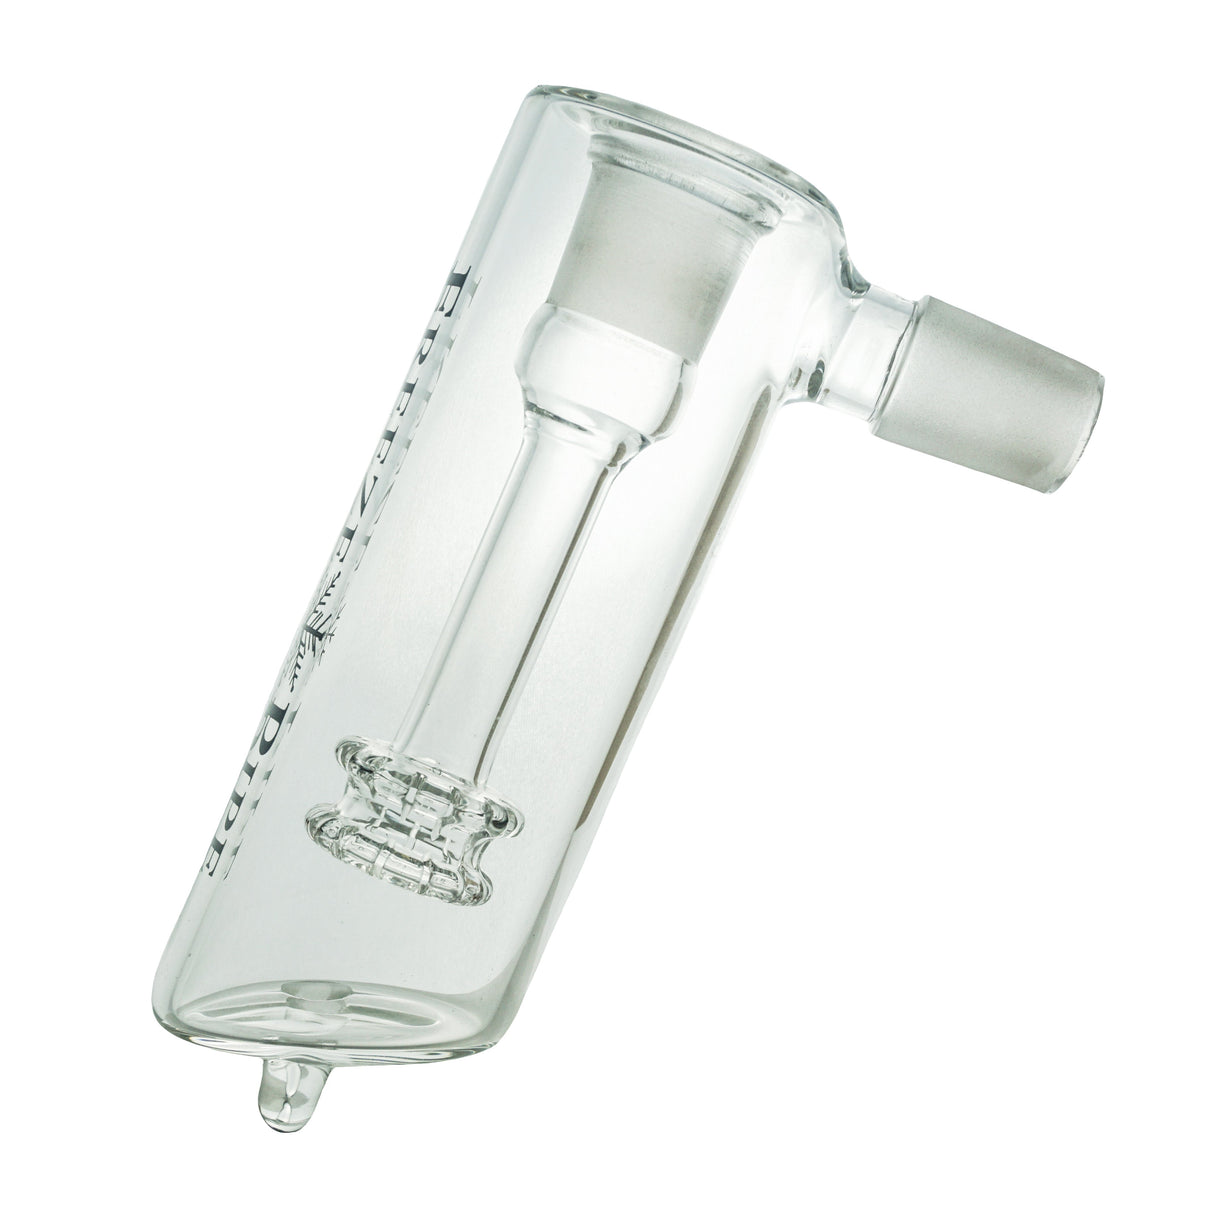 Freeze Pipe Bubbler Pro with a clear glass angled side view on a white background